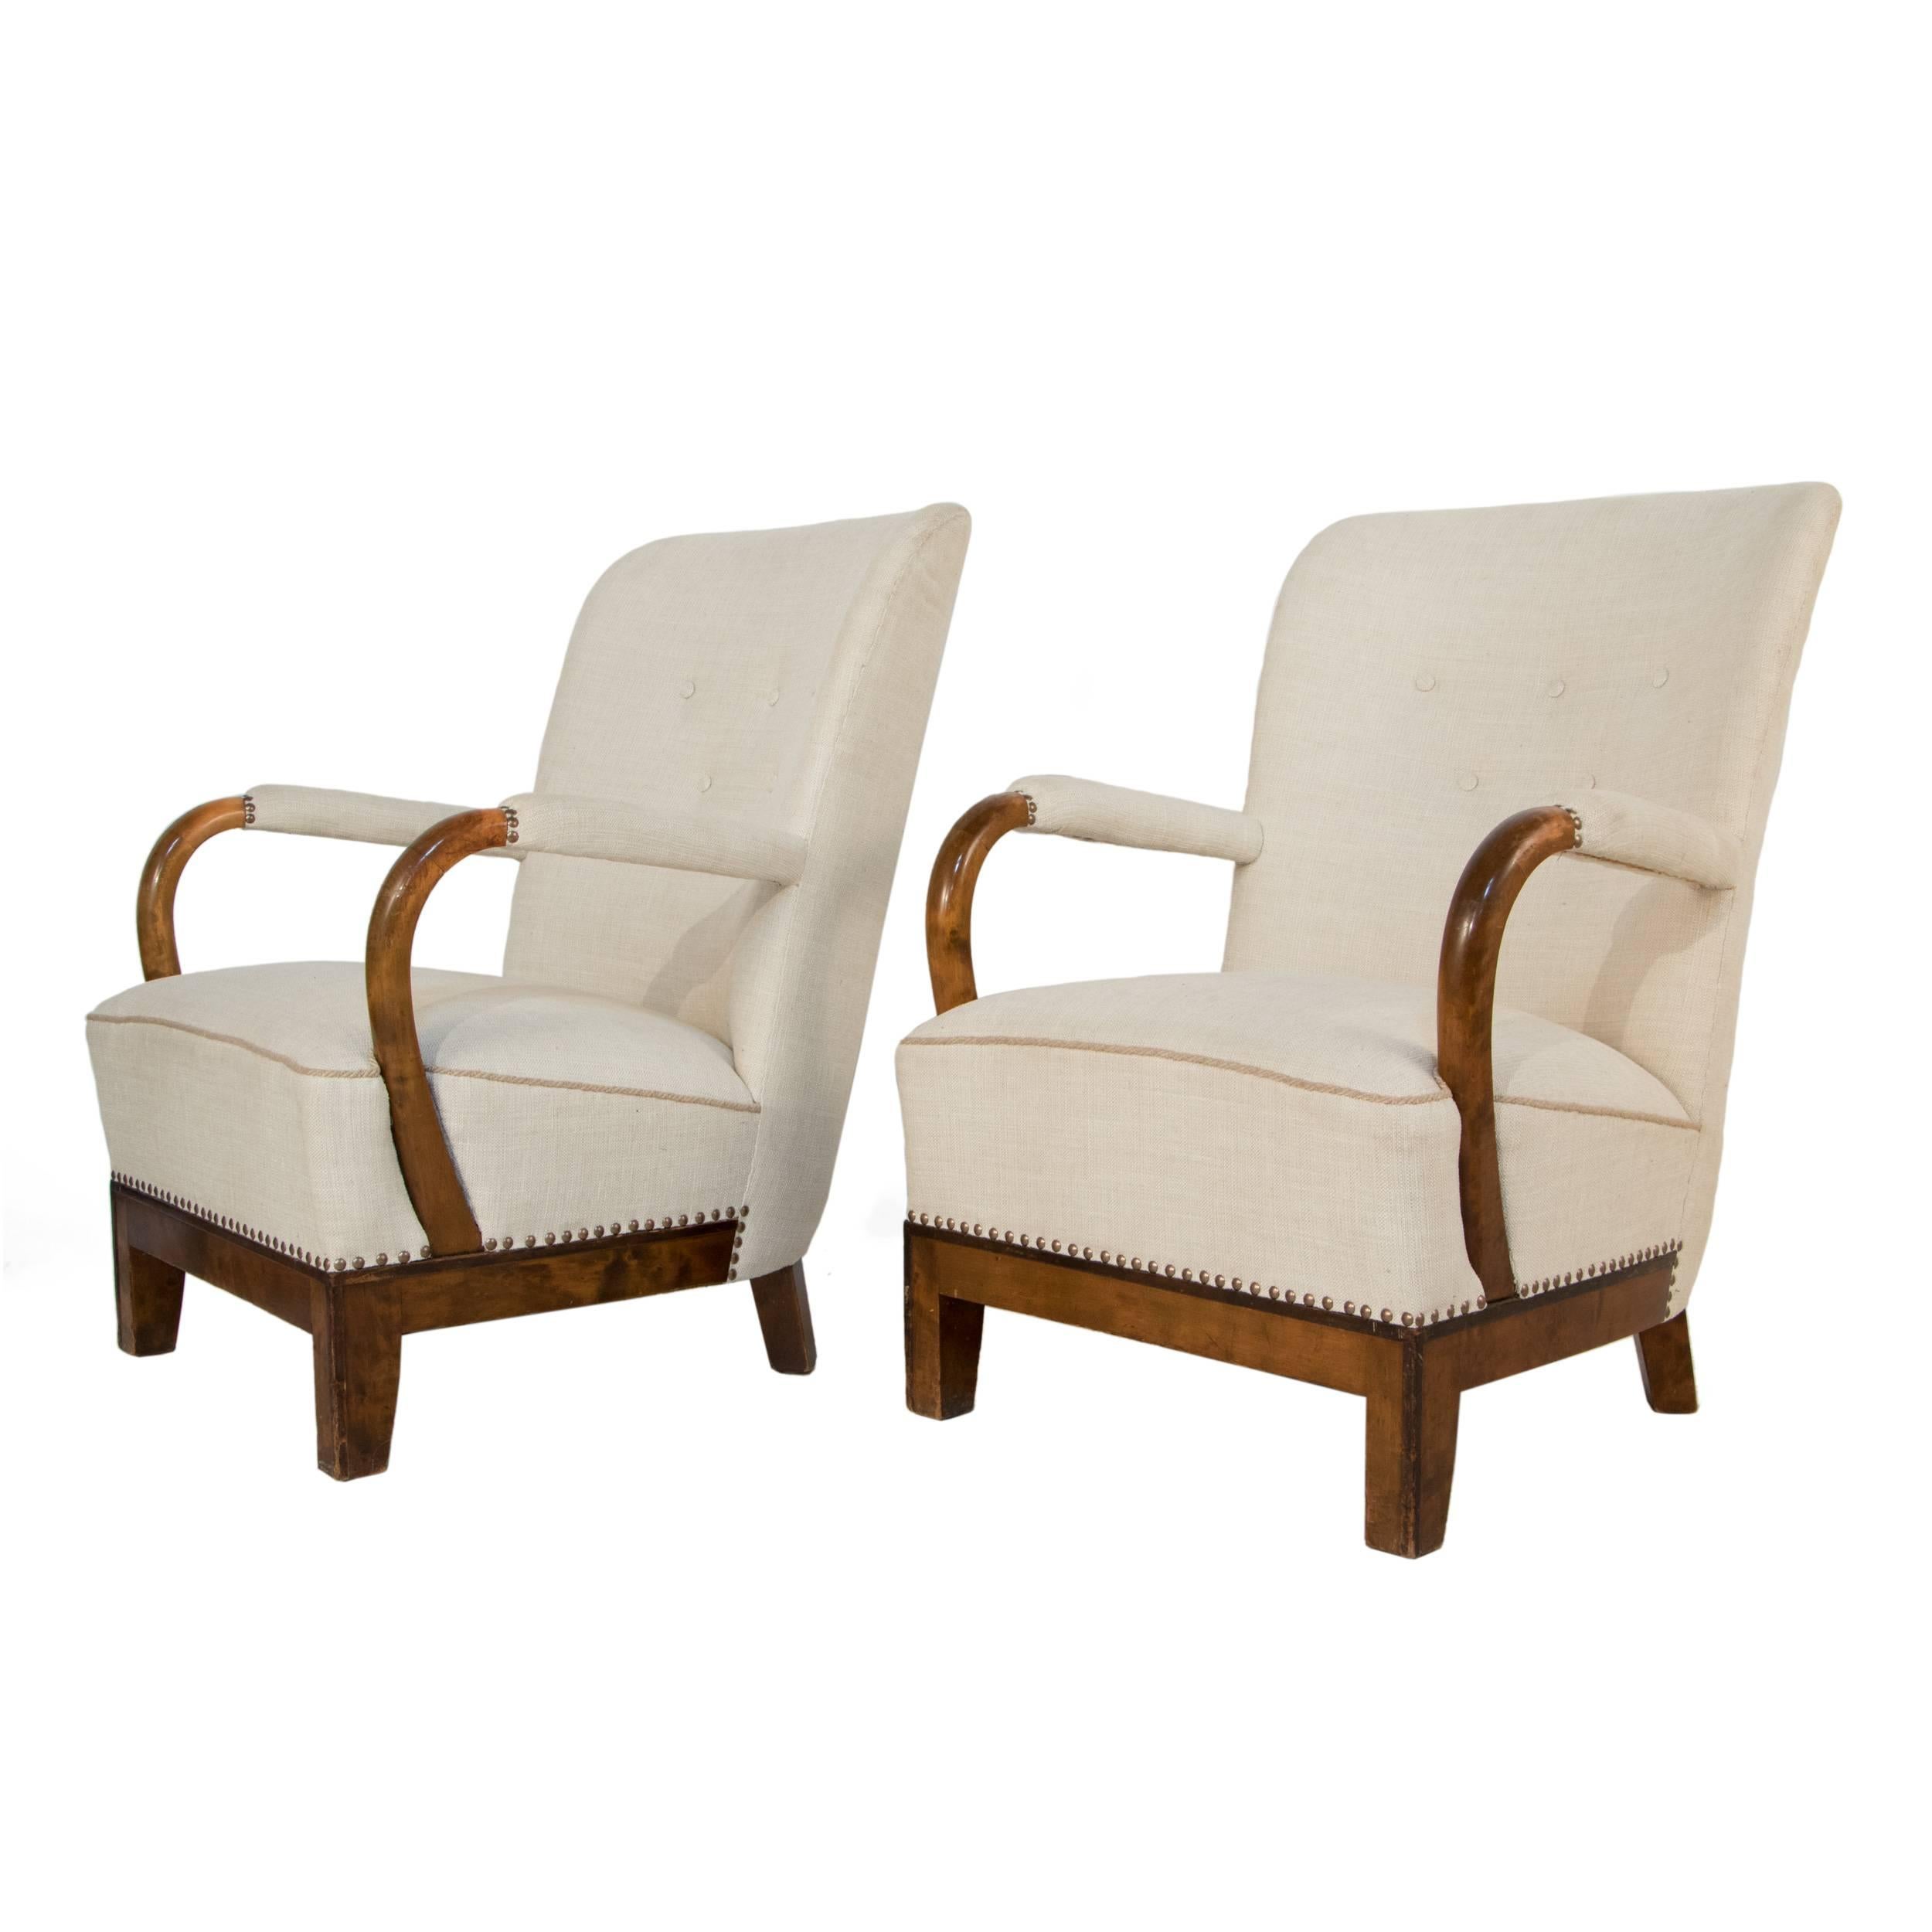 Pair of Swedish grace lounge chairs in birch.